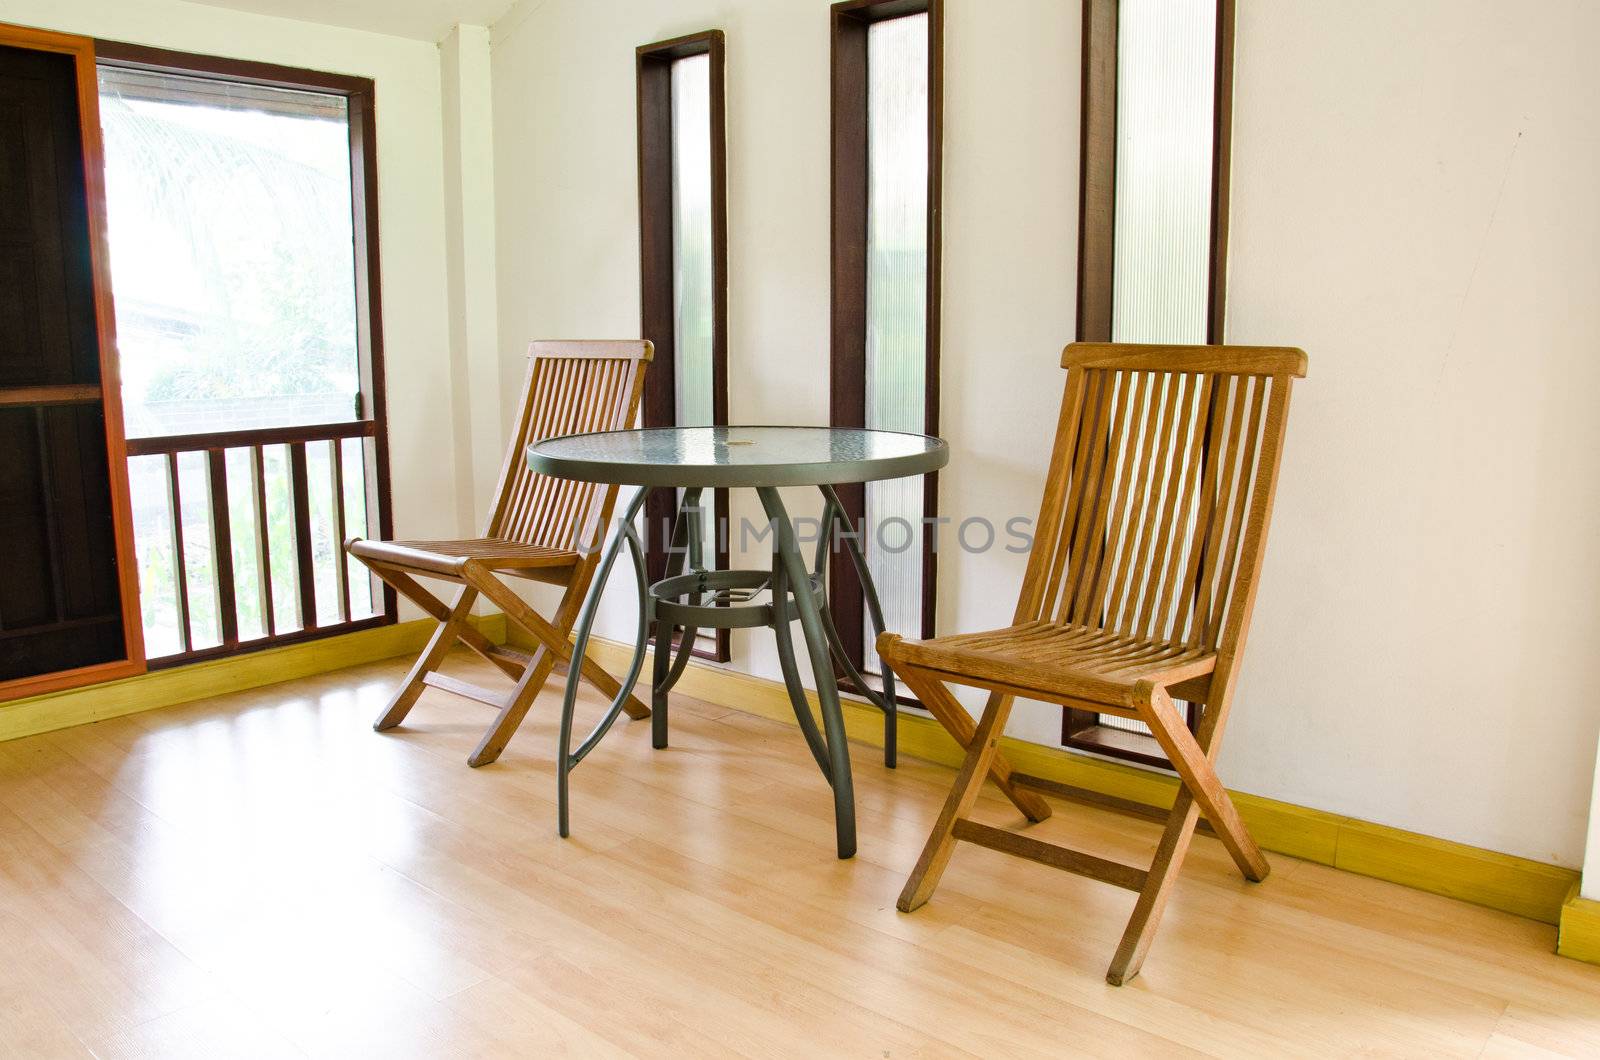 The living room is decorated with wooden chair.